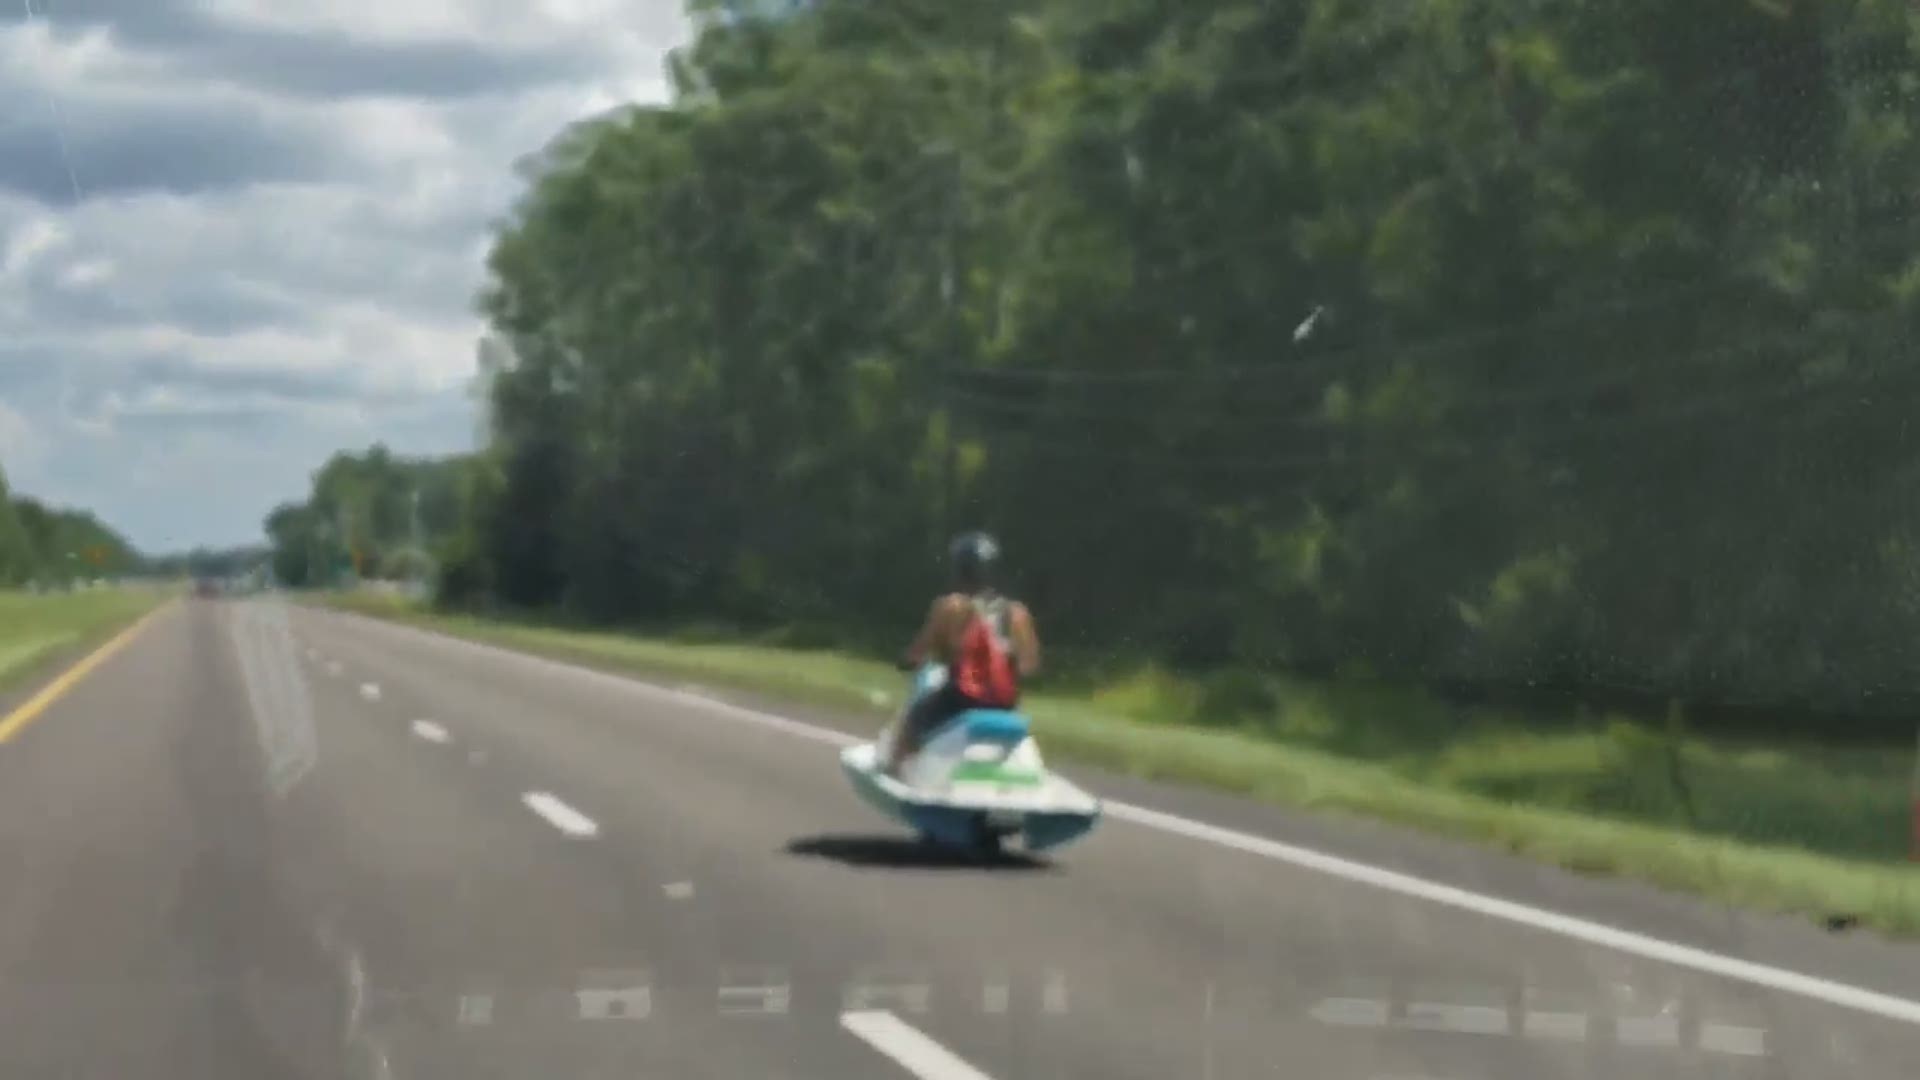 Man was caught on camera driving a jet ski on Normandy Boulevard, Tuesday.